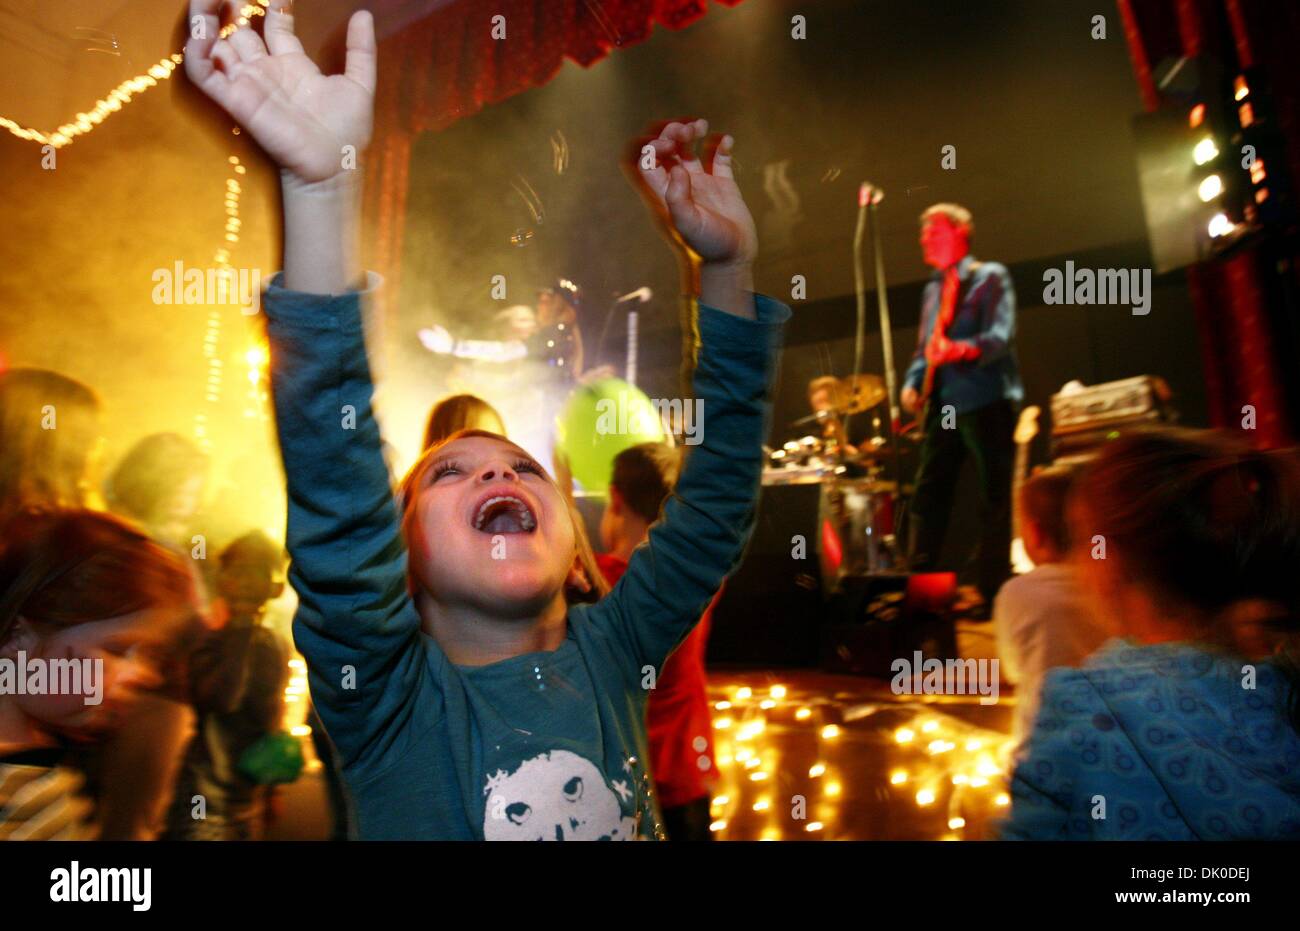 Dec. 30, 2010 - U.S. - NEW YEARS------STAND ALONE-------December 30, 2010 - Maggie Criner (center), 5, joyfully joins the mini-mosh during the 20th annual New Year's at Noon celebration at the Children's Museum of Memphis. Roughly 1,200 people enjoyed romping through the museum with crafts and live music as they rang in the new year. It was the largest attended New Years at noon ce Stock Photo